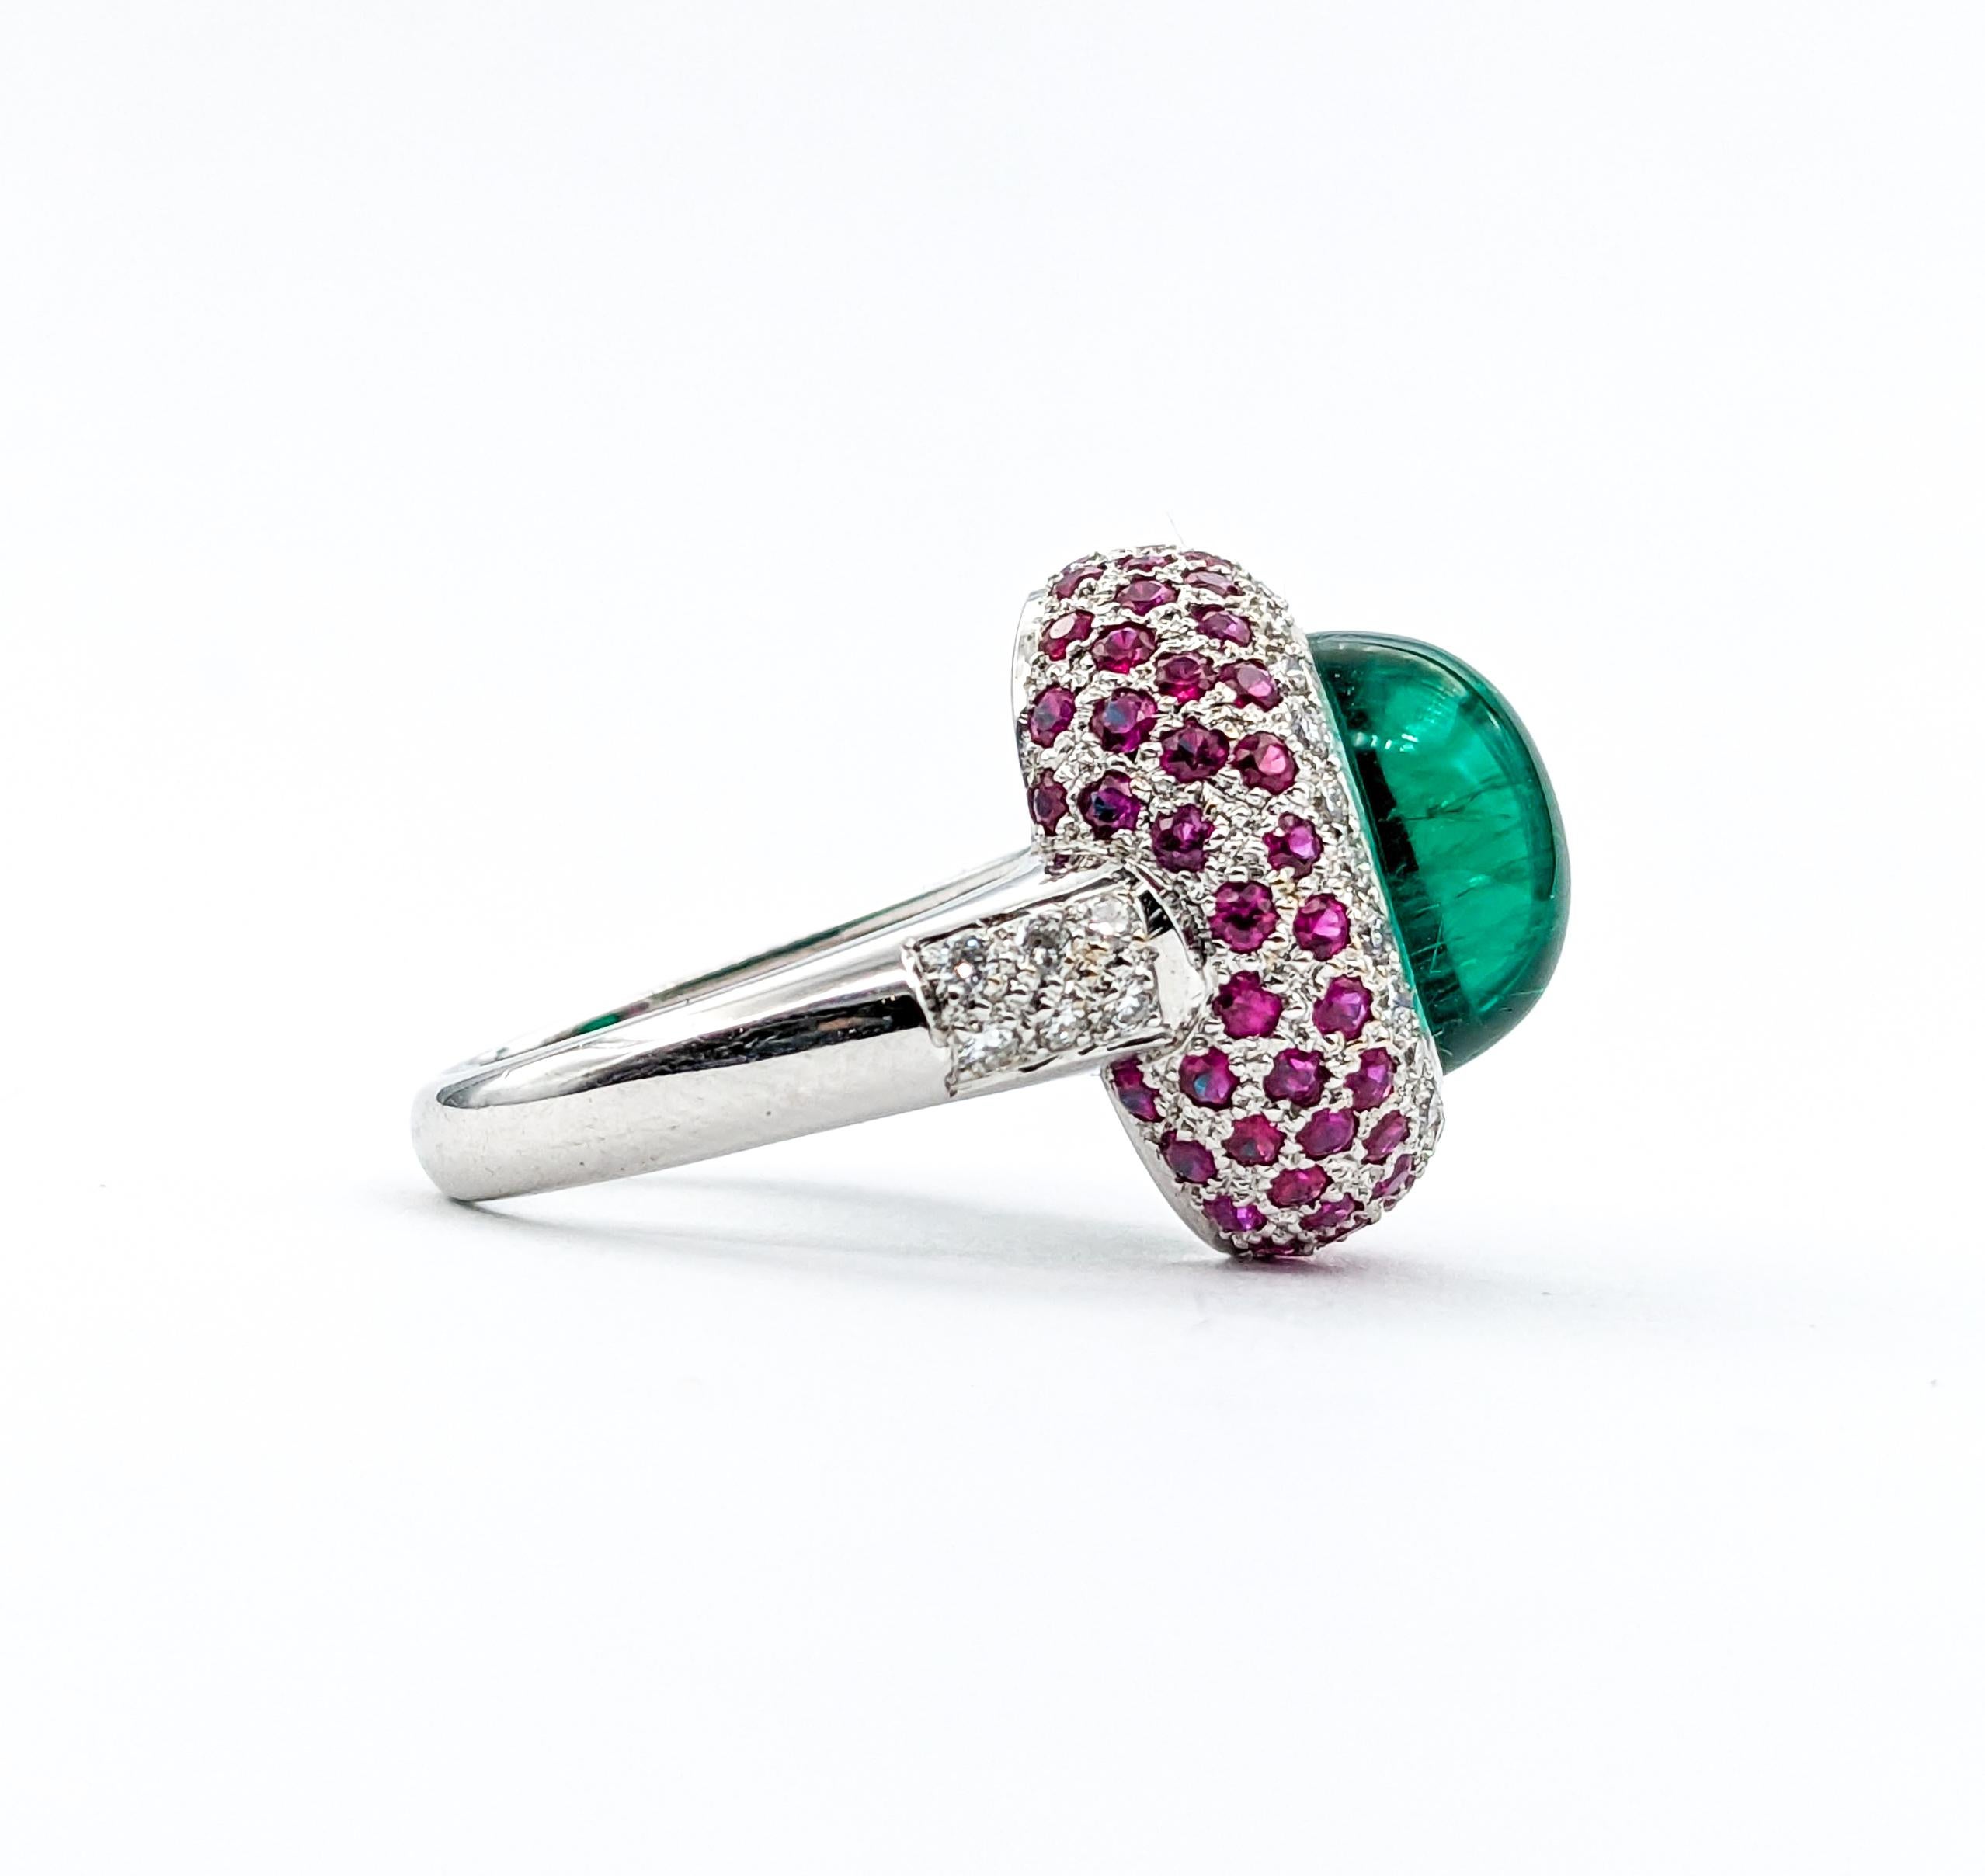 Chatham Emerald & Ruby , Diamond Ring In White Gold

Introducing this stunningly unique Emerald cocktail ring, beautifully crafted in 18K white gold. This ring boasts a sumptuous Green Chatham Emerald Cabochon surrounded by Diamonds and Rubies. The